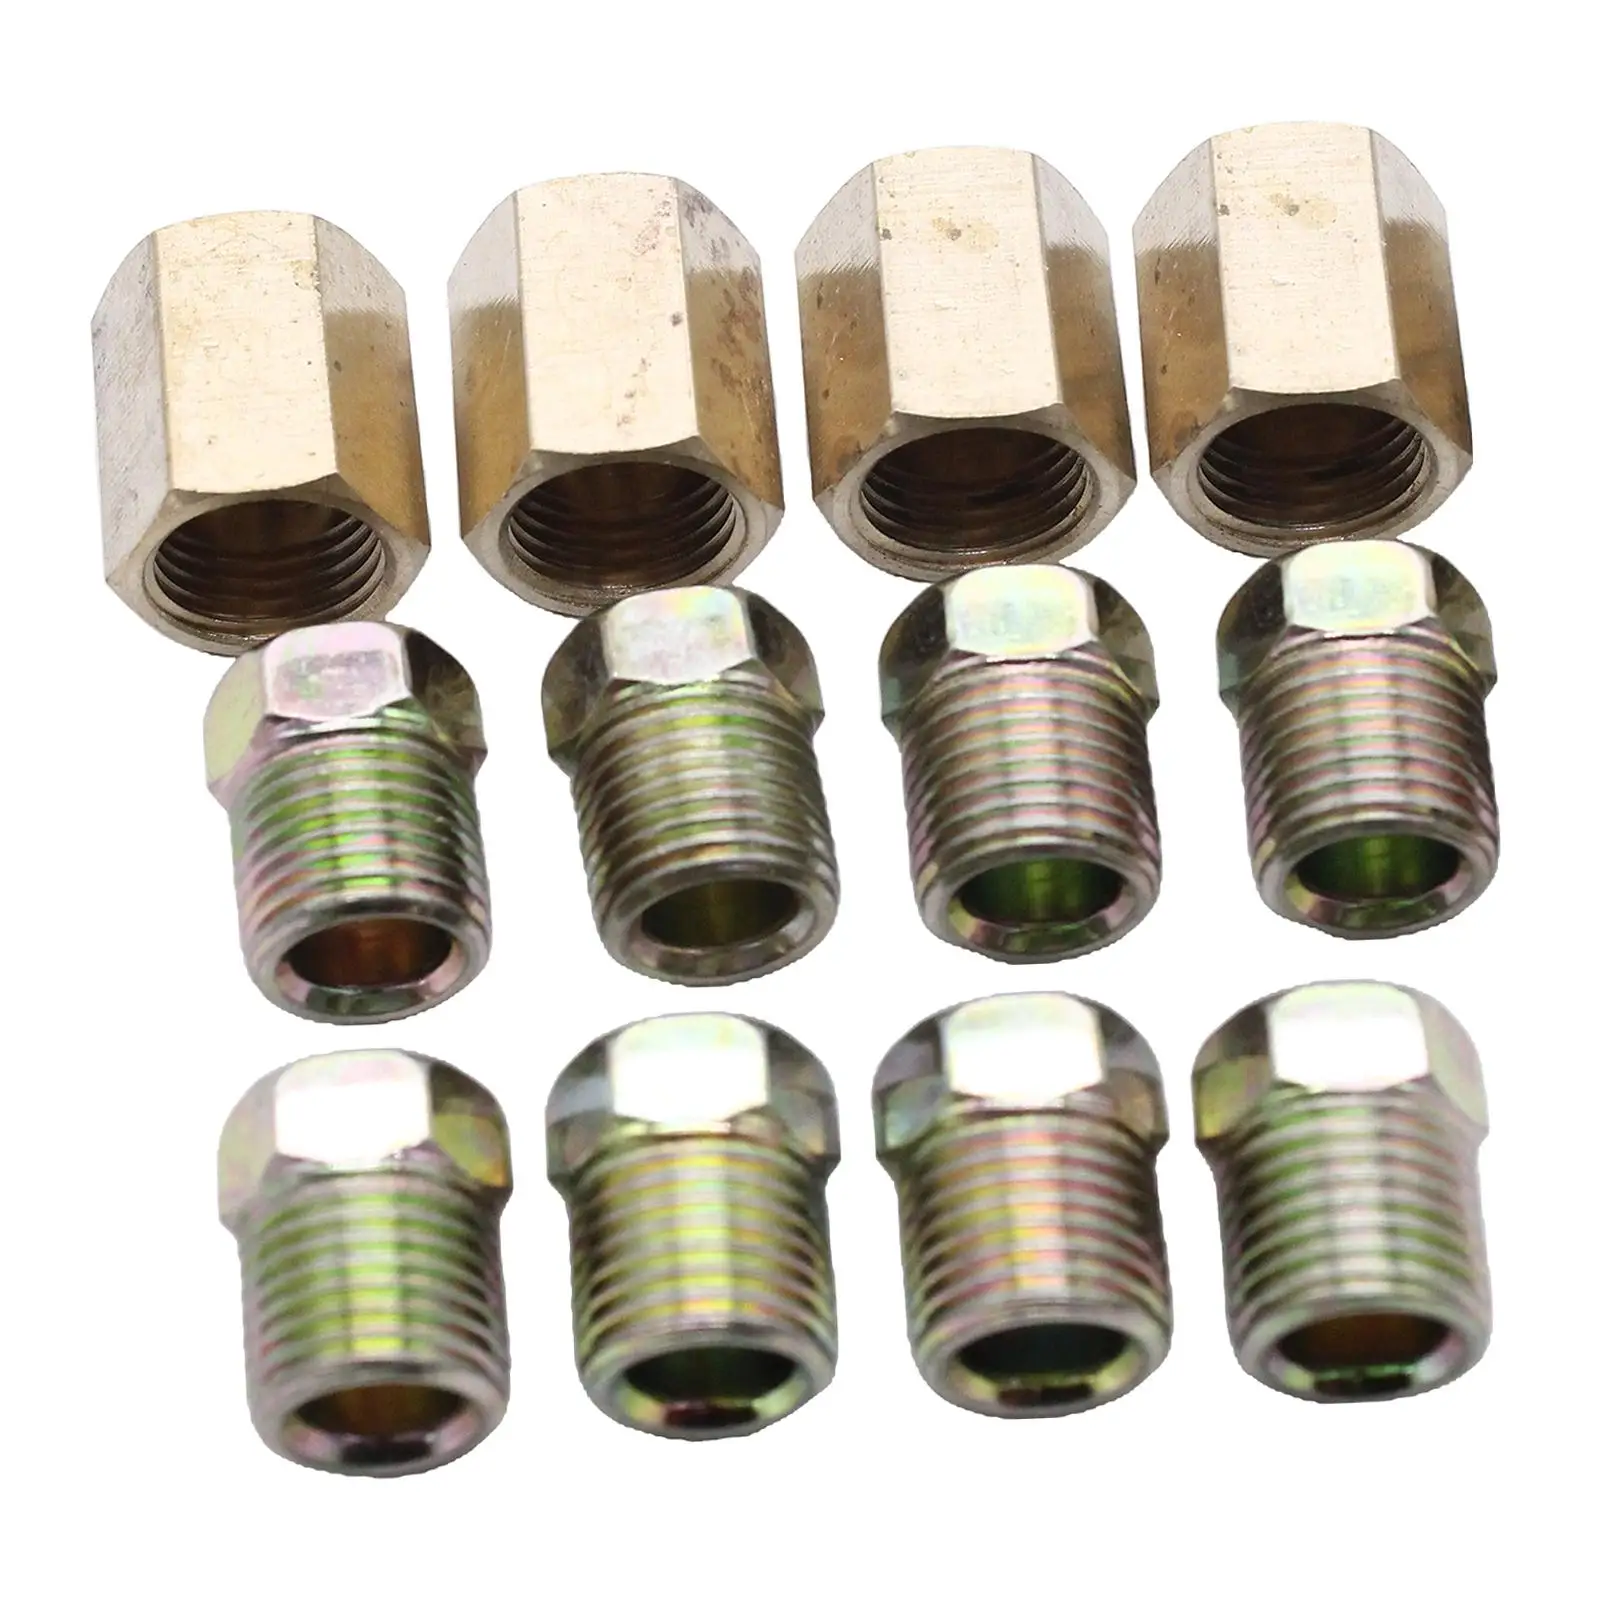 1/4 inch Brake Line Connector Fittings Brass Unions 7/16-24 Inverted Motors Parts